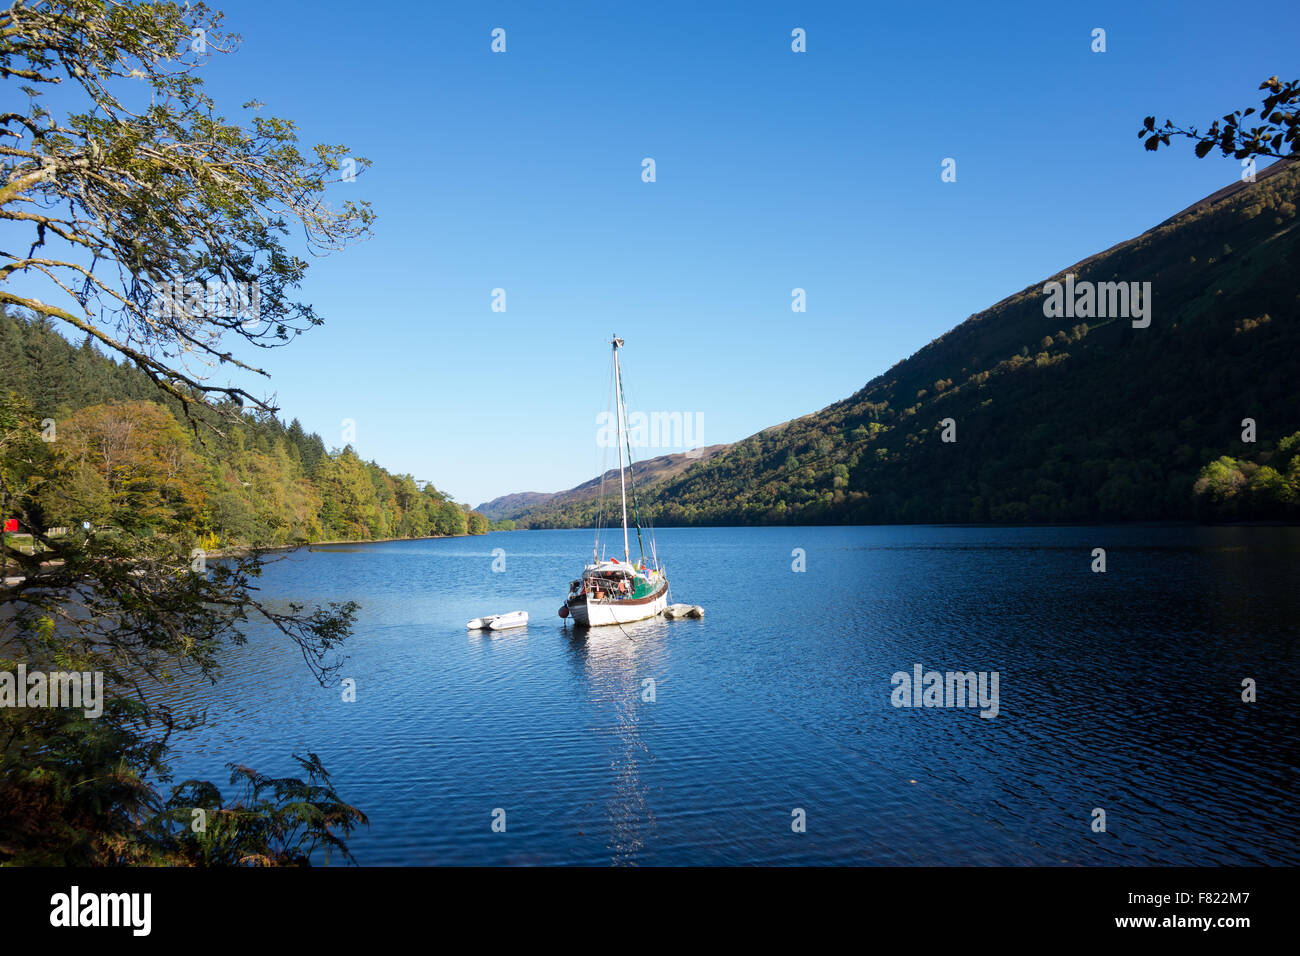 A view along Loch Ness on a beautiful autumn's day Stock Photo